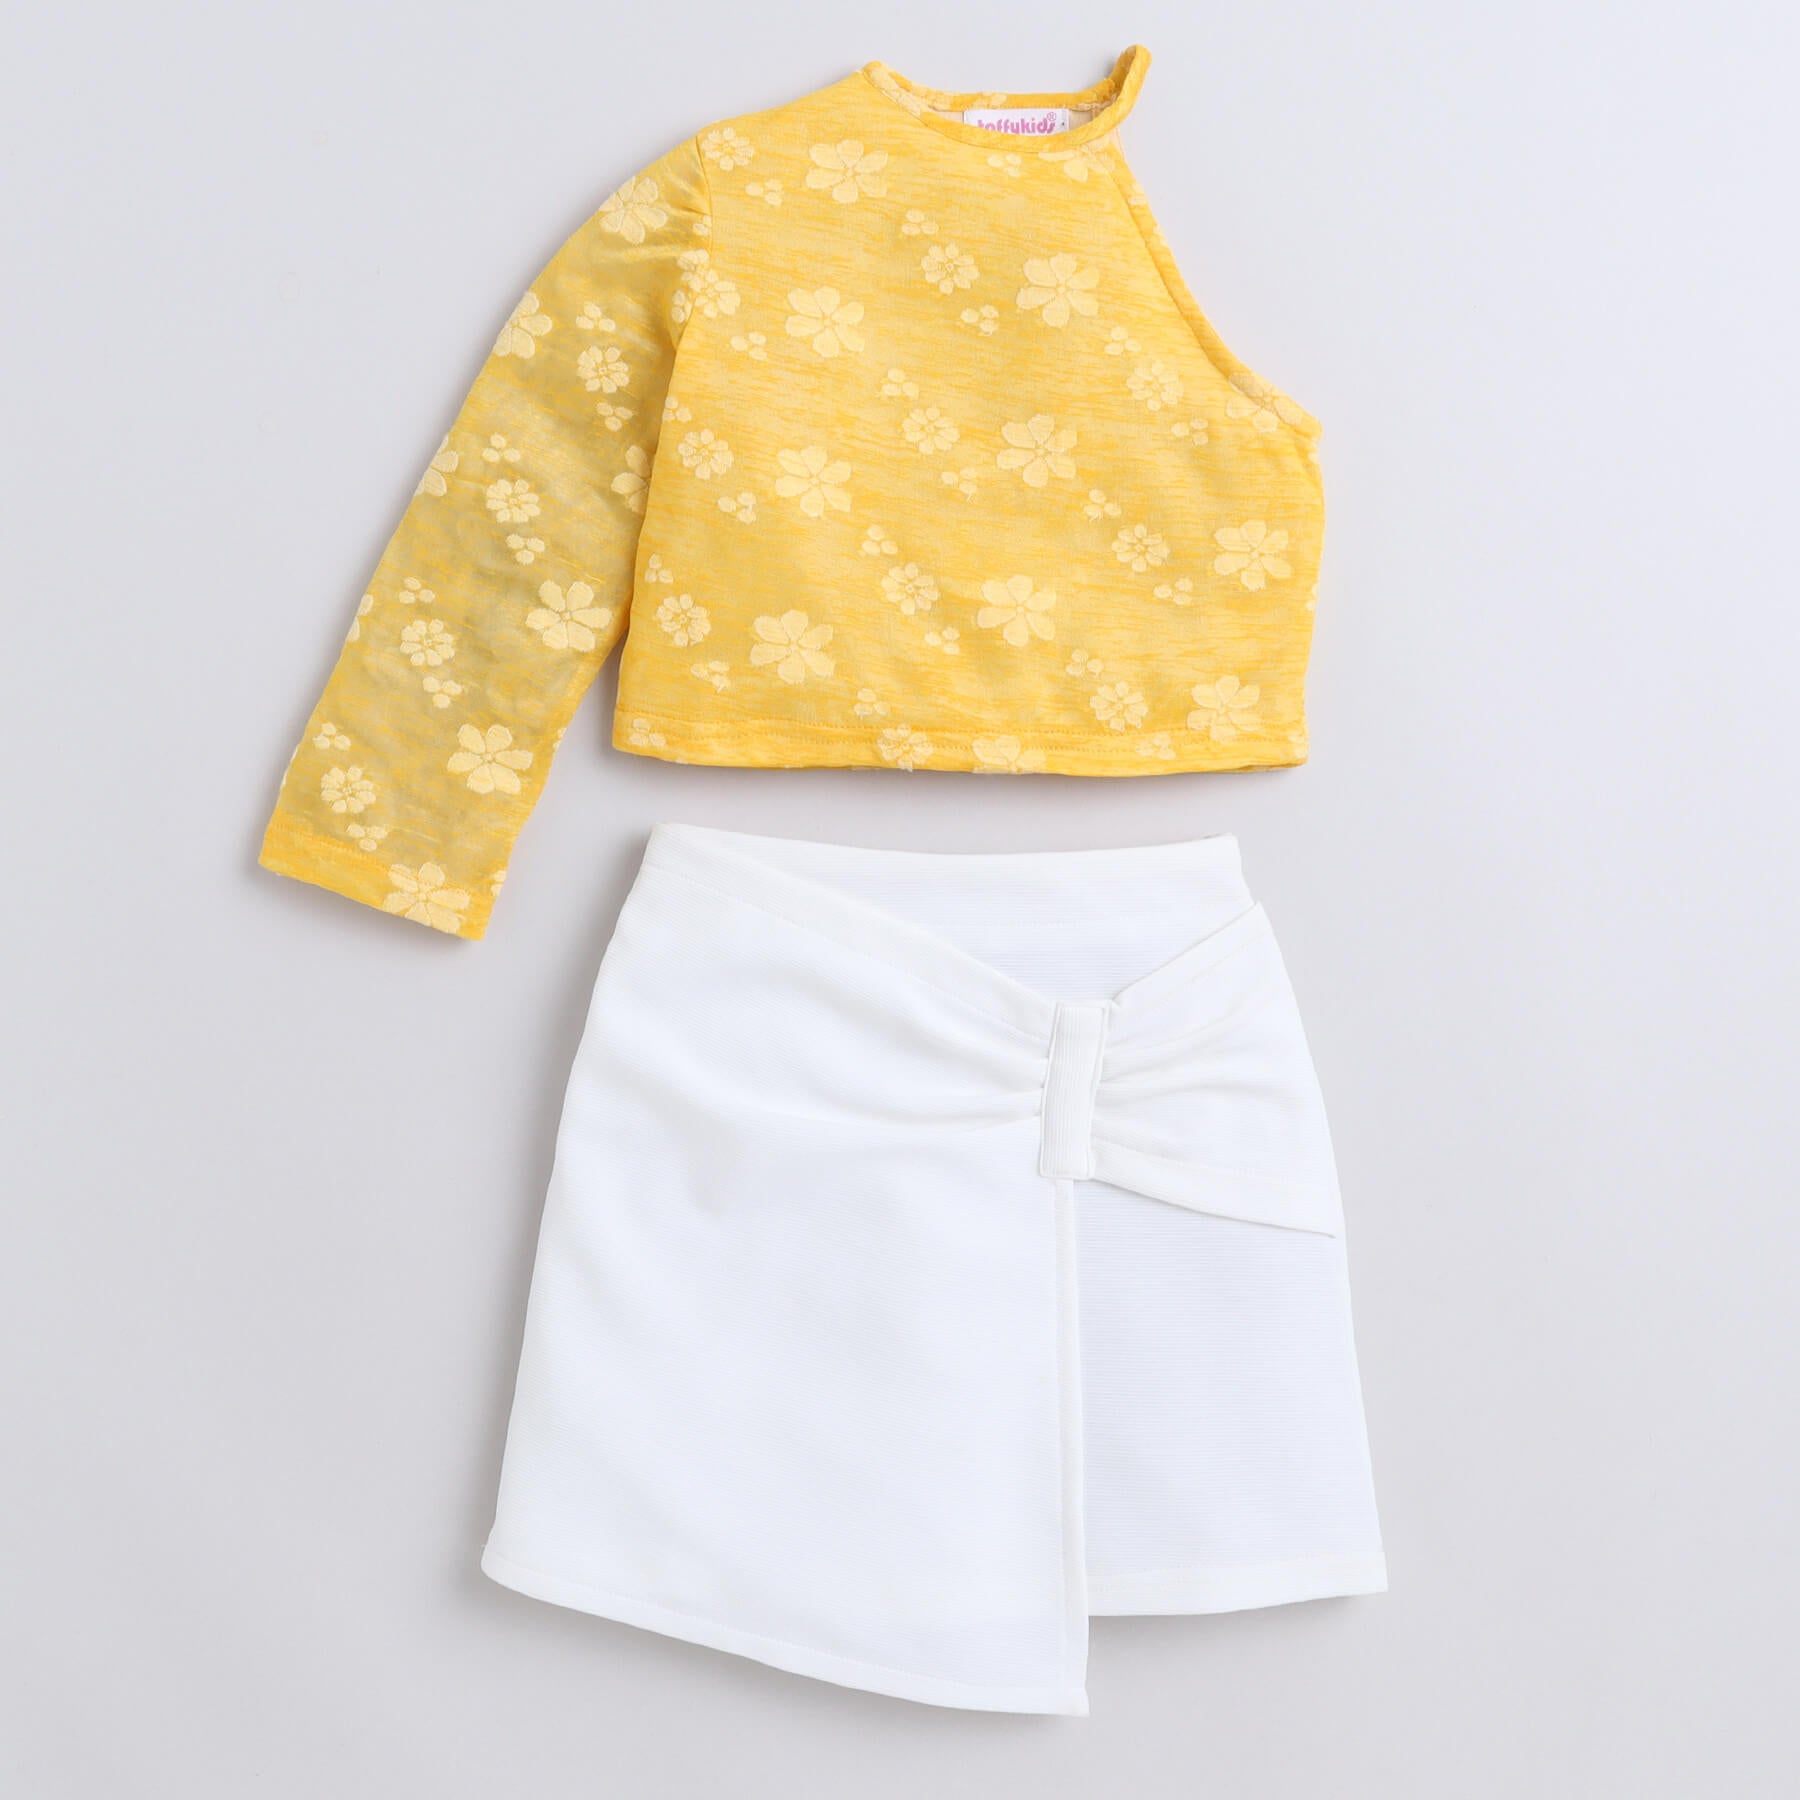 Taffykids asymmetric neck Party top and bow detail skirt set-Yellow/White